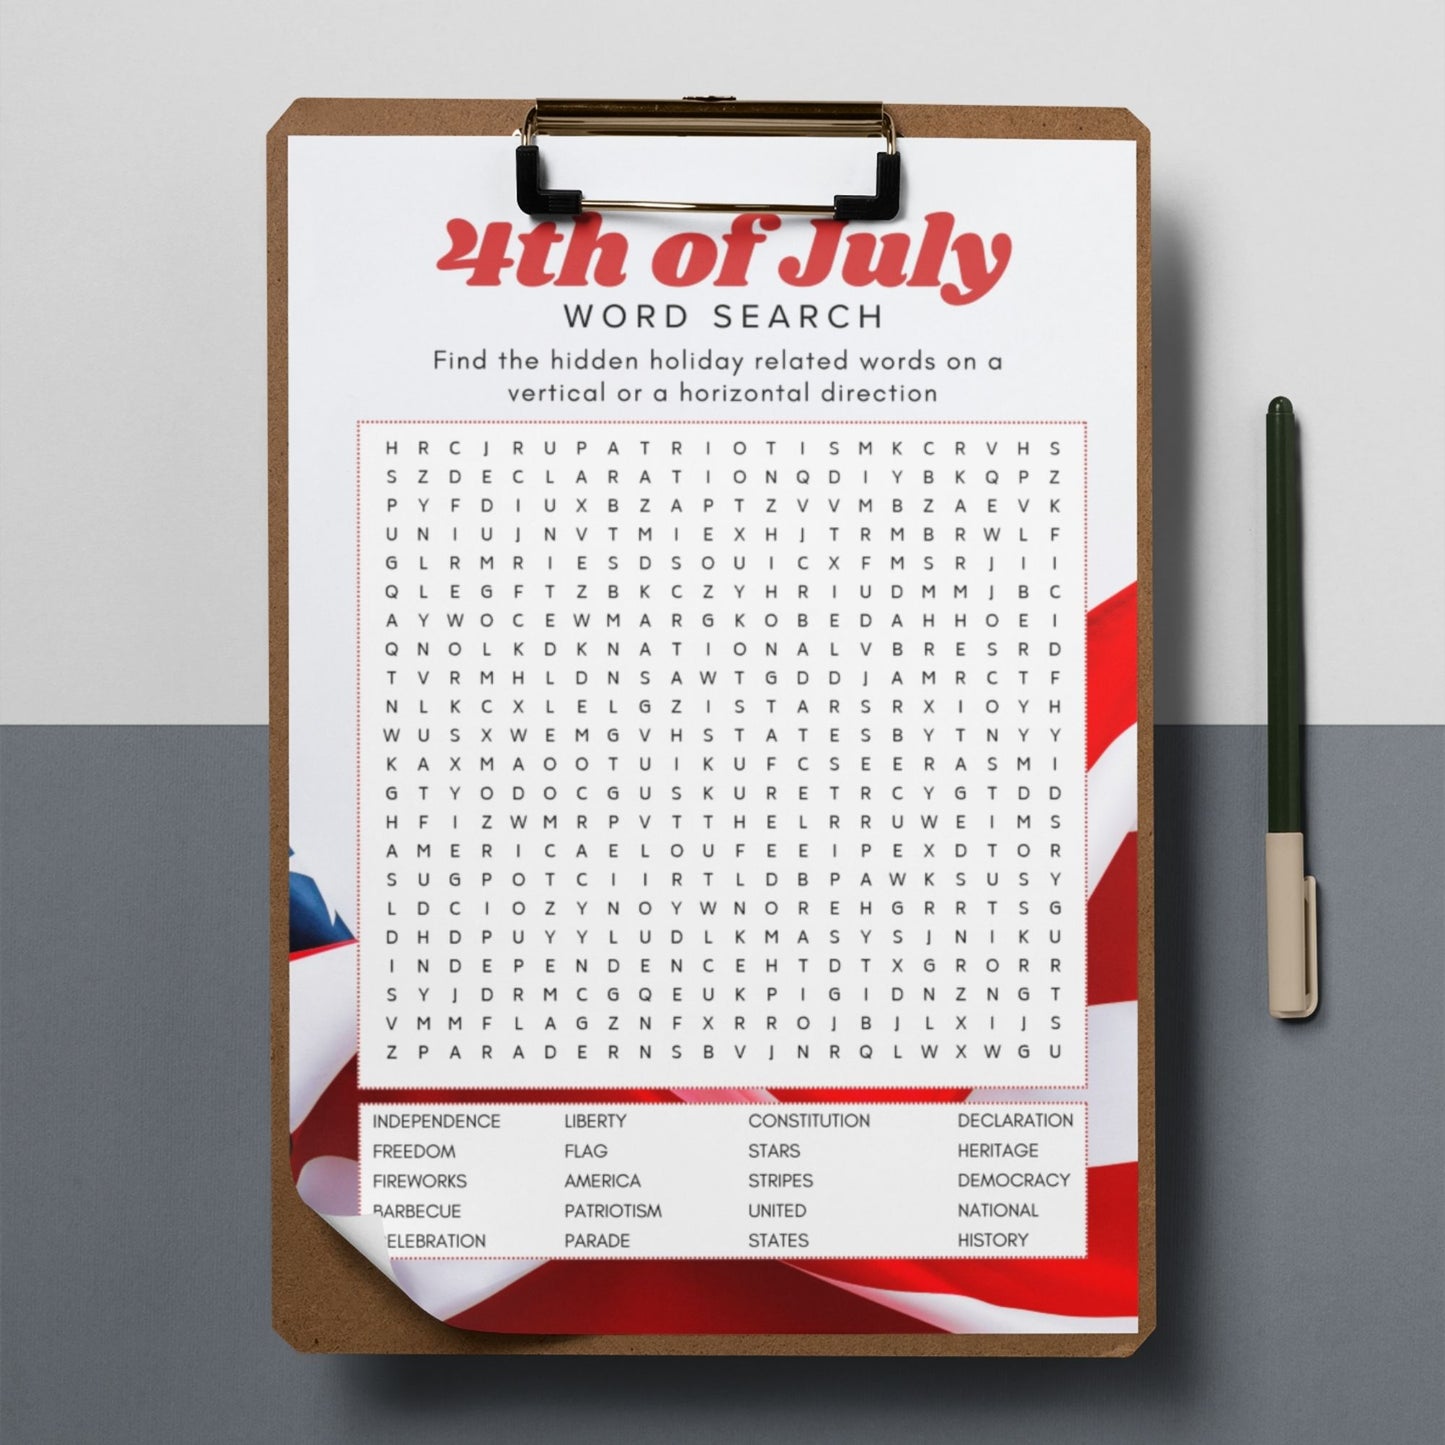 4th of July Word Search PDF